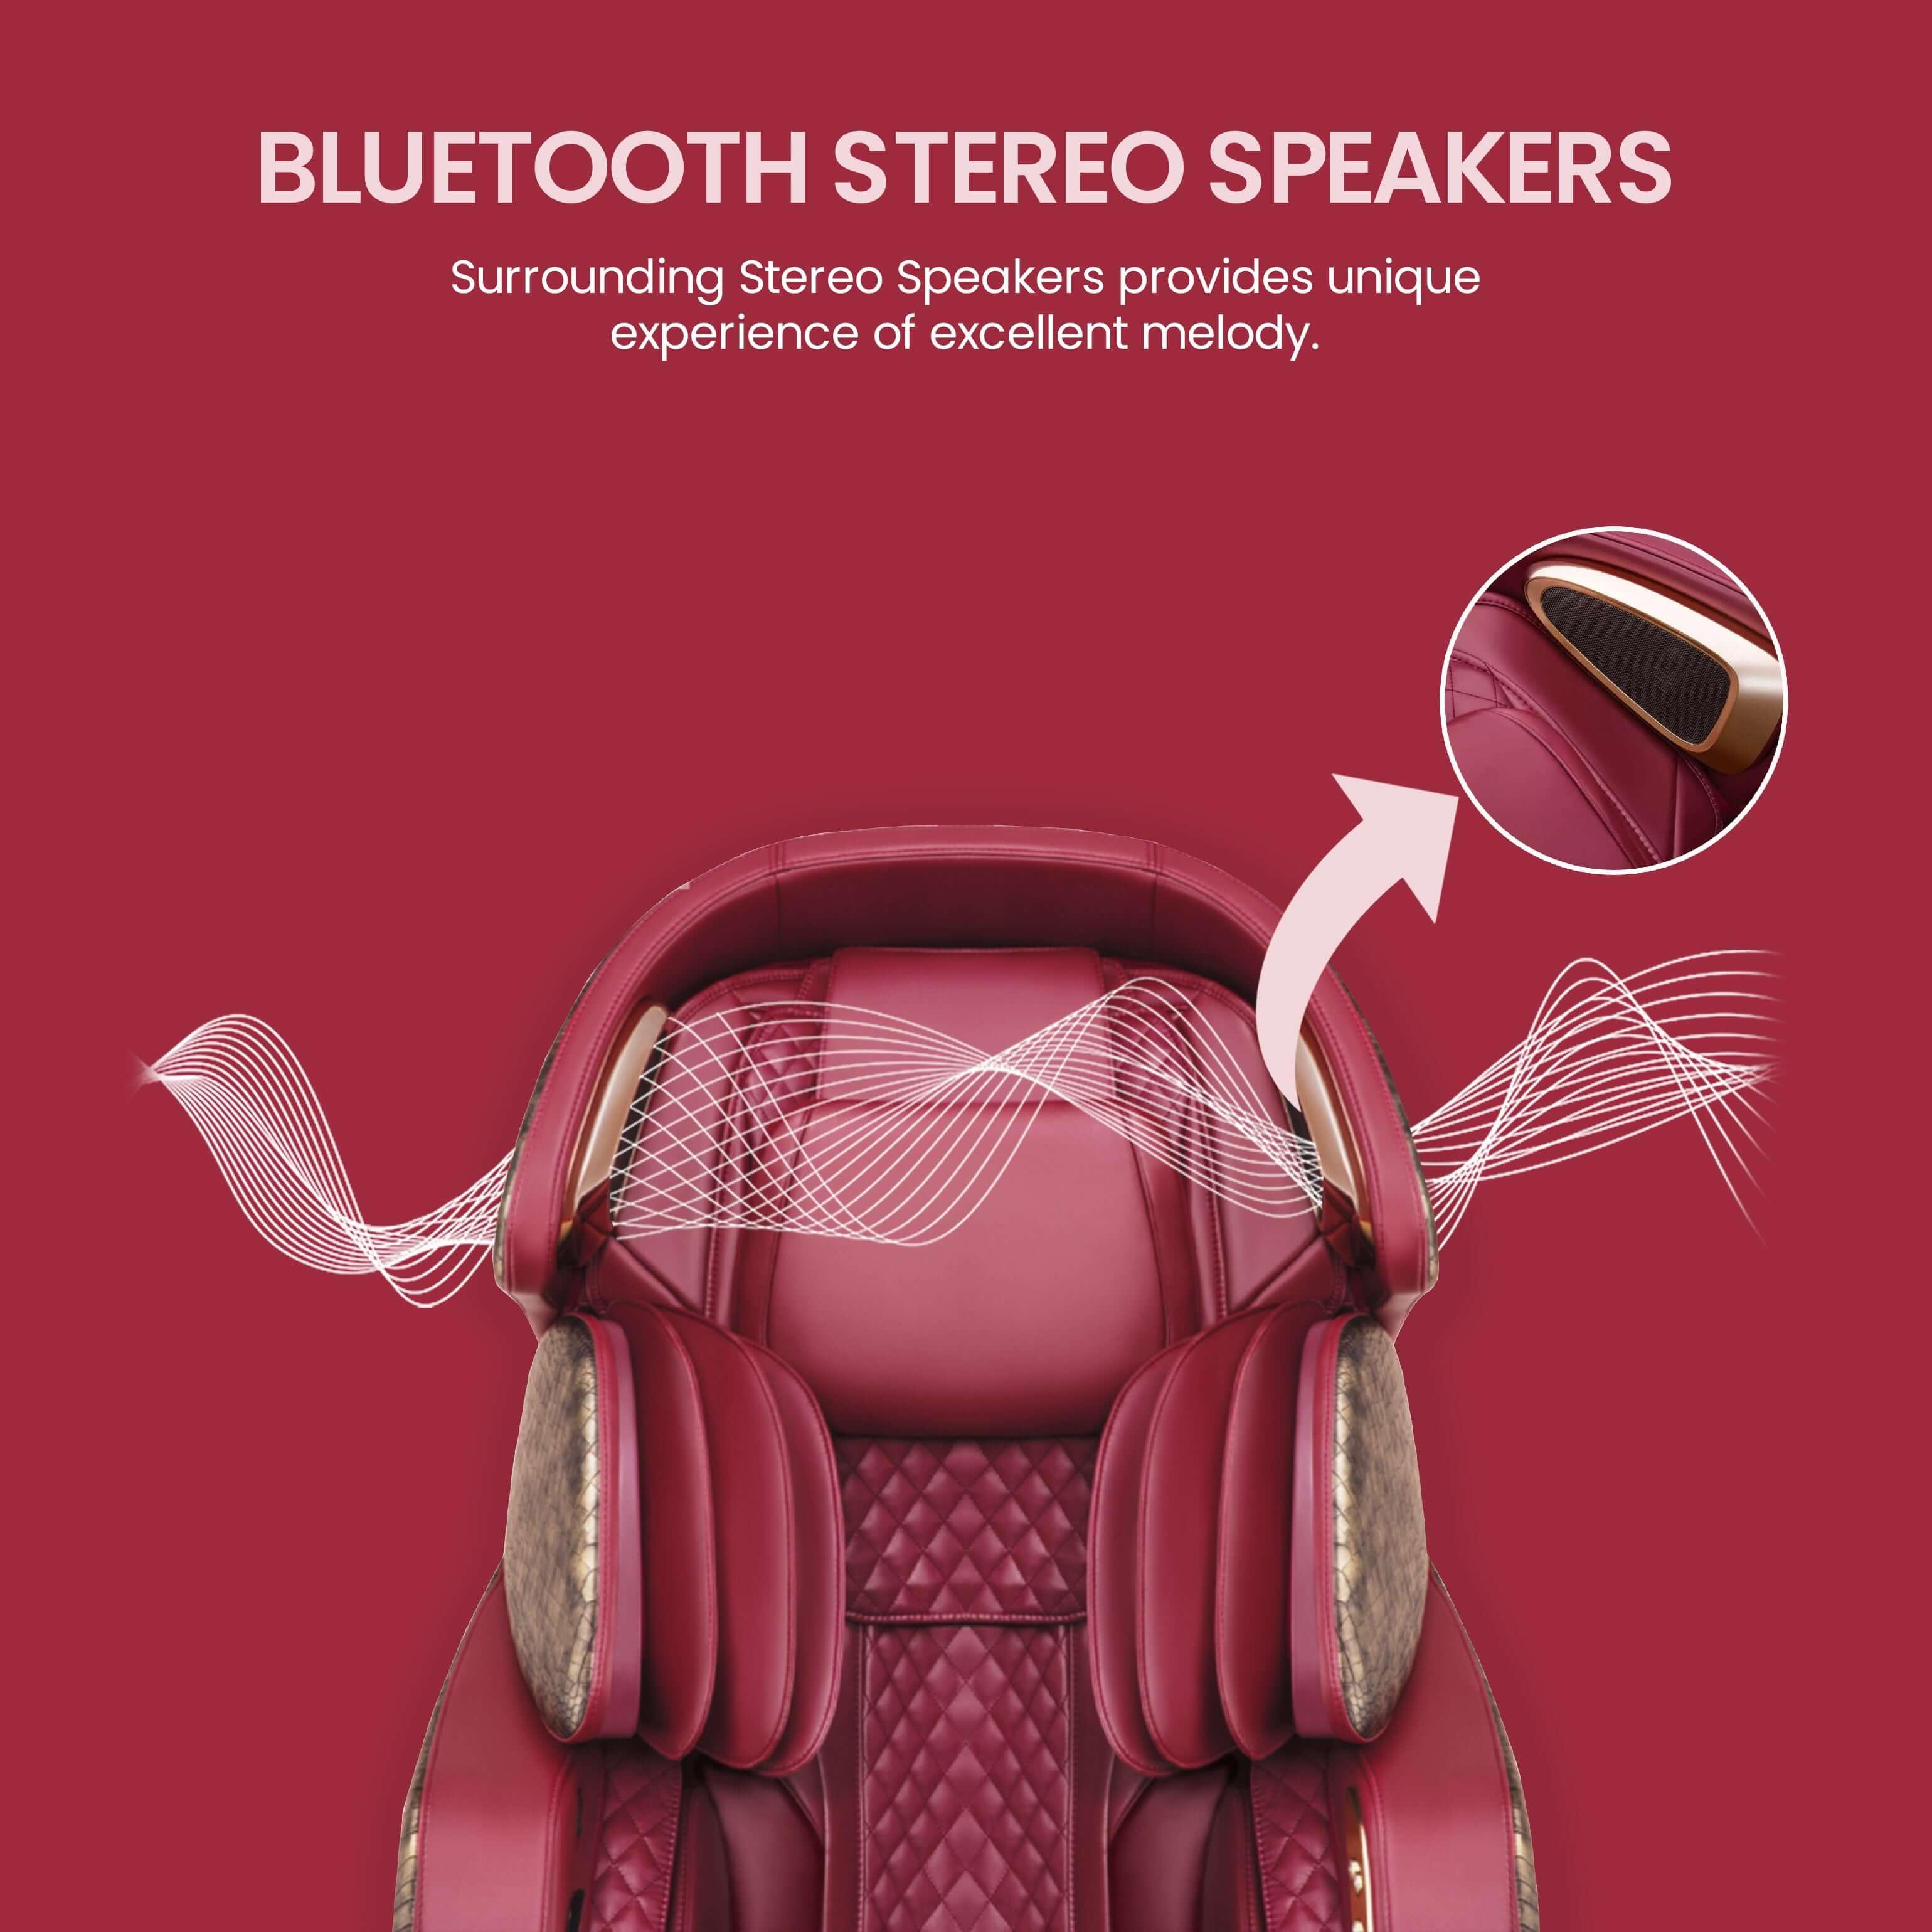 Bluetooth stereo speakers on yoga massage chair with high-quality sound for a unique experience. Best massage chair in UAE, Dubai. كرسي مساج كهربائي, best massage chair uae, massage chair Dubai, massage chair uae, massage chair Saudi Arabia, كرسي التدليك,